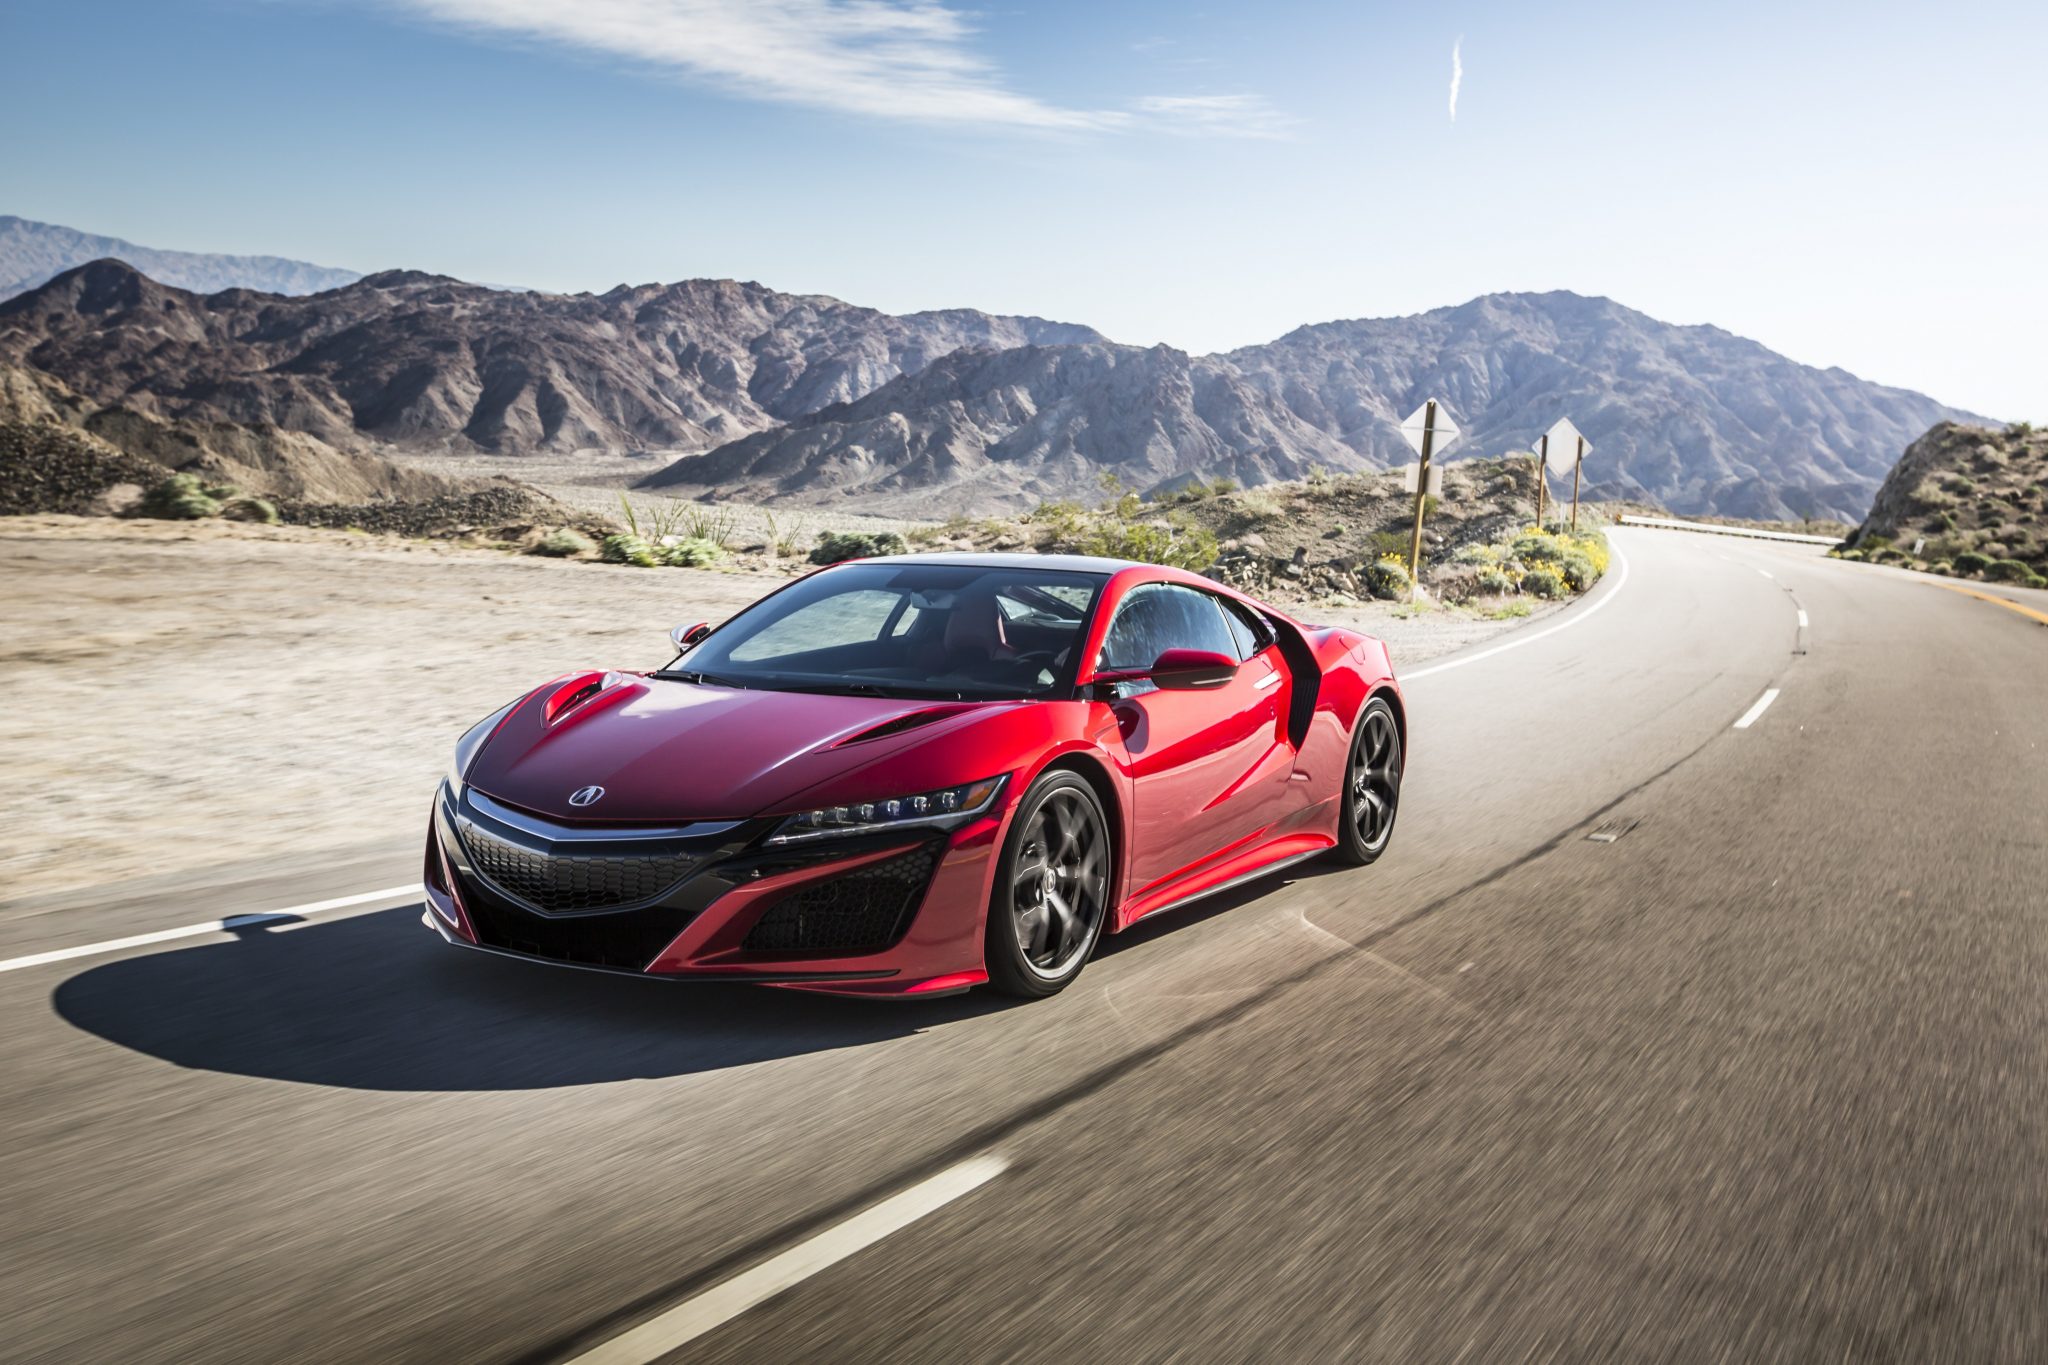 HQ Acura NSX Wallpapers | File 388.88Kb